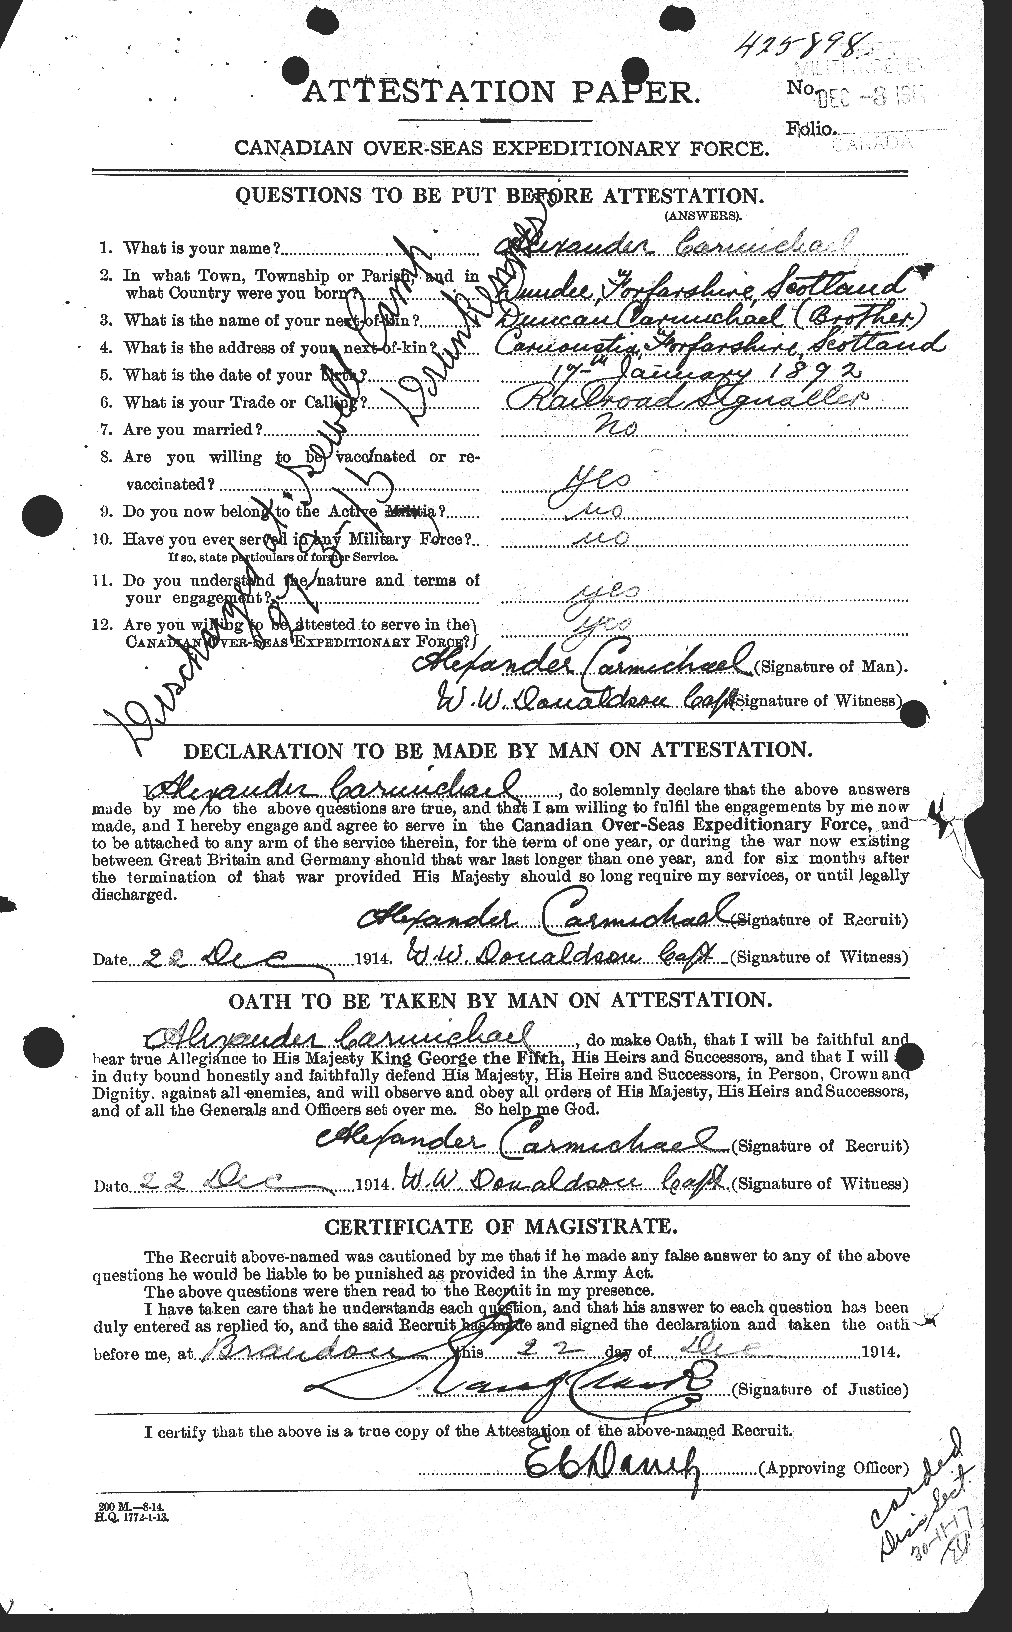 Personnel Records of the First World War - CEF 009823a